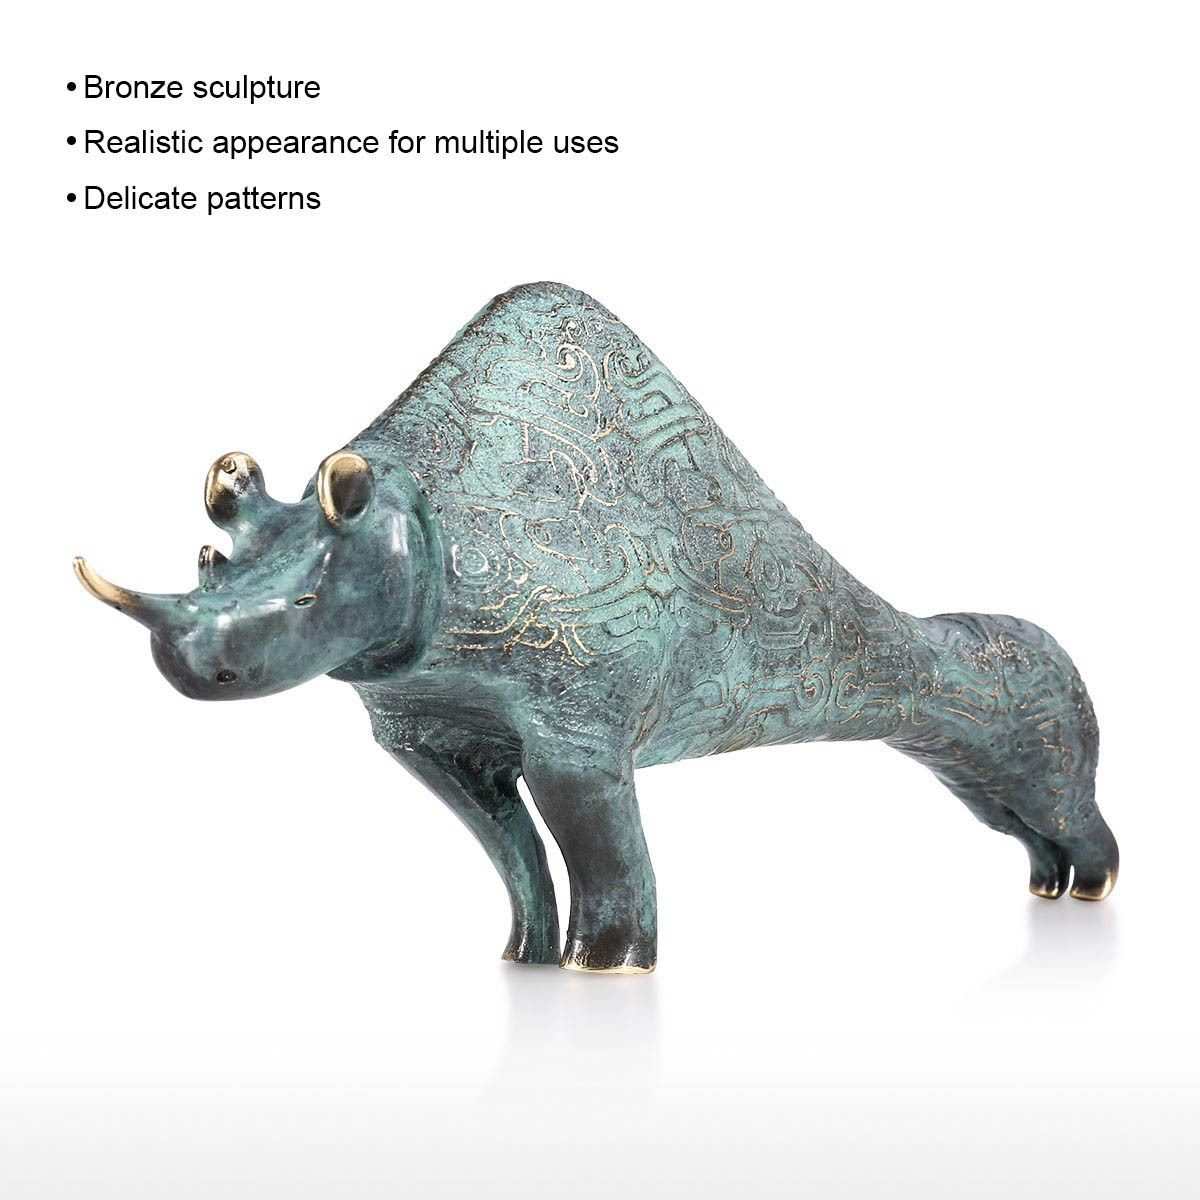 Bronze Sculpture with Rhinoceros Ornament and Decor for Home Decor and Christmas Decorations